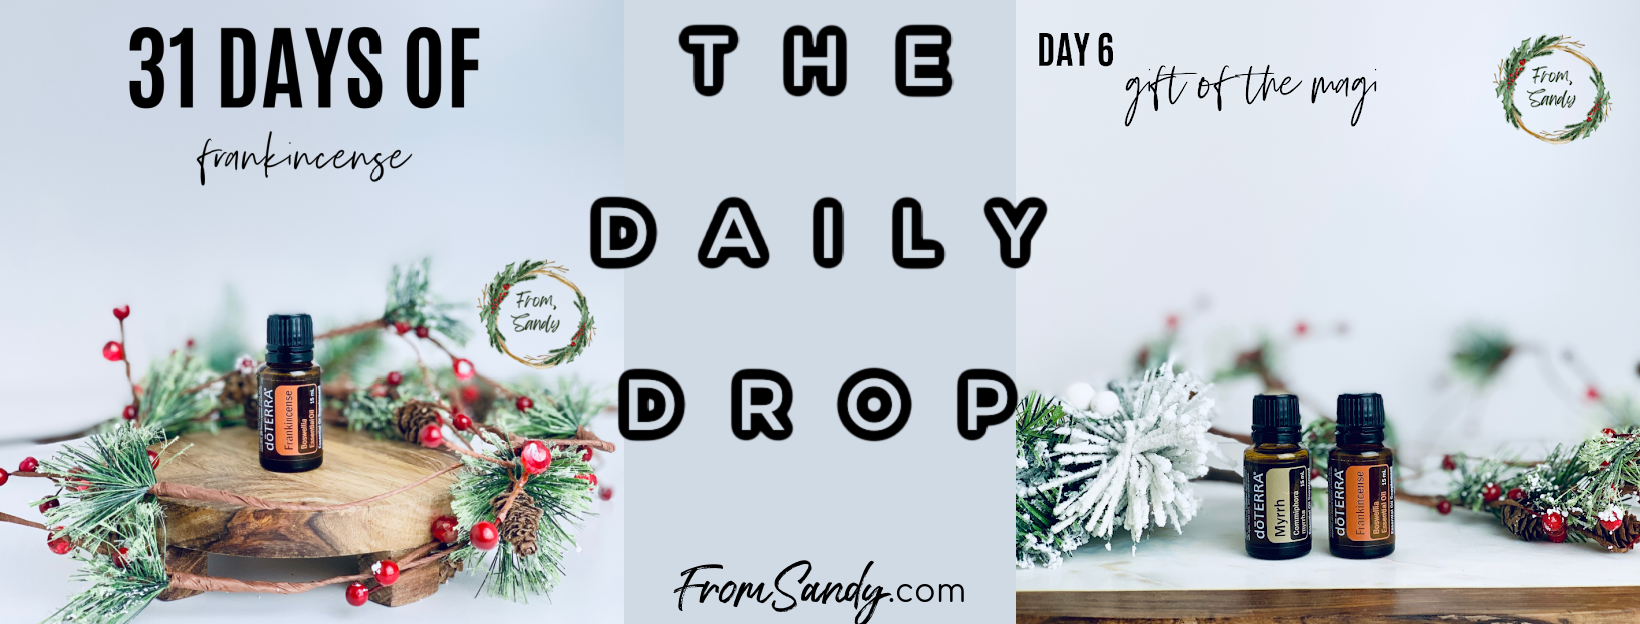 Gift of the Magi (31 Days of Frankincense: Day 6), From Sandy